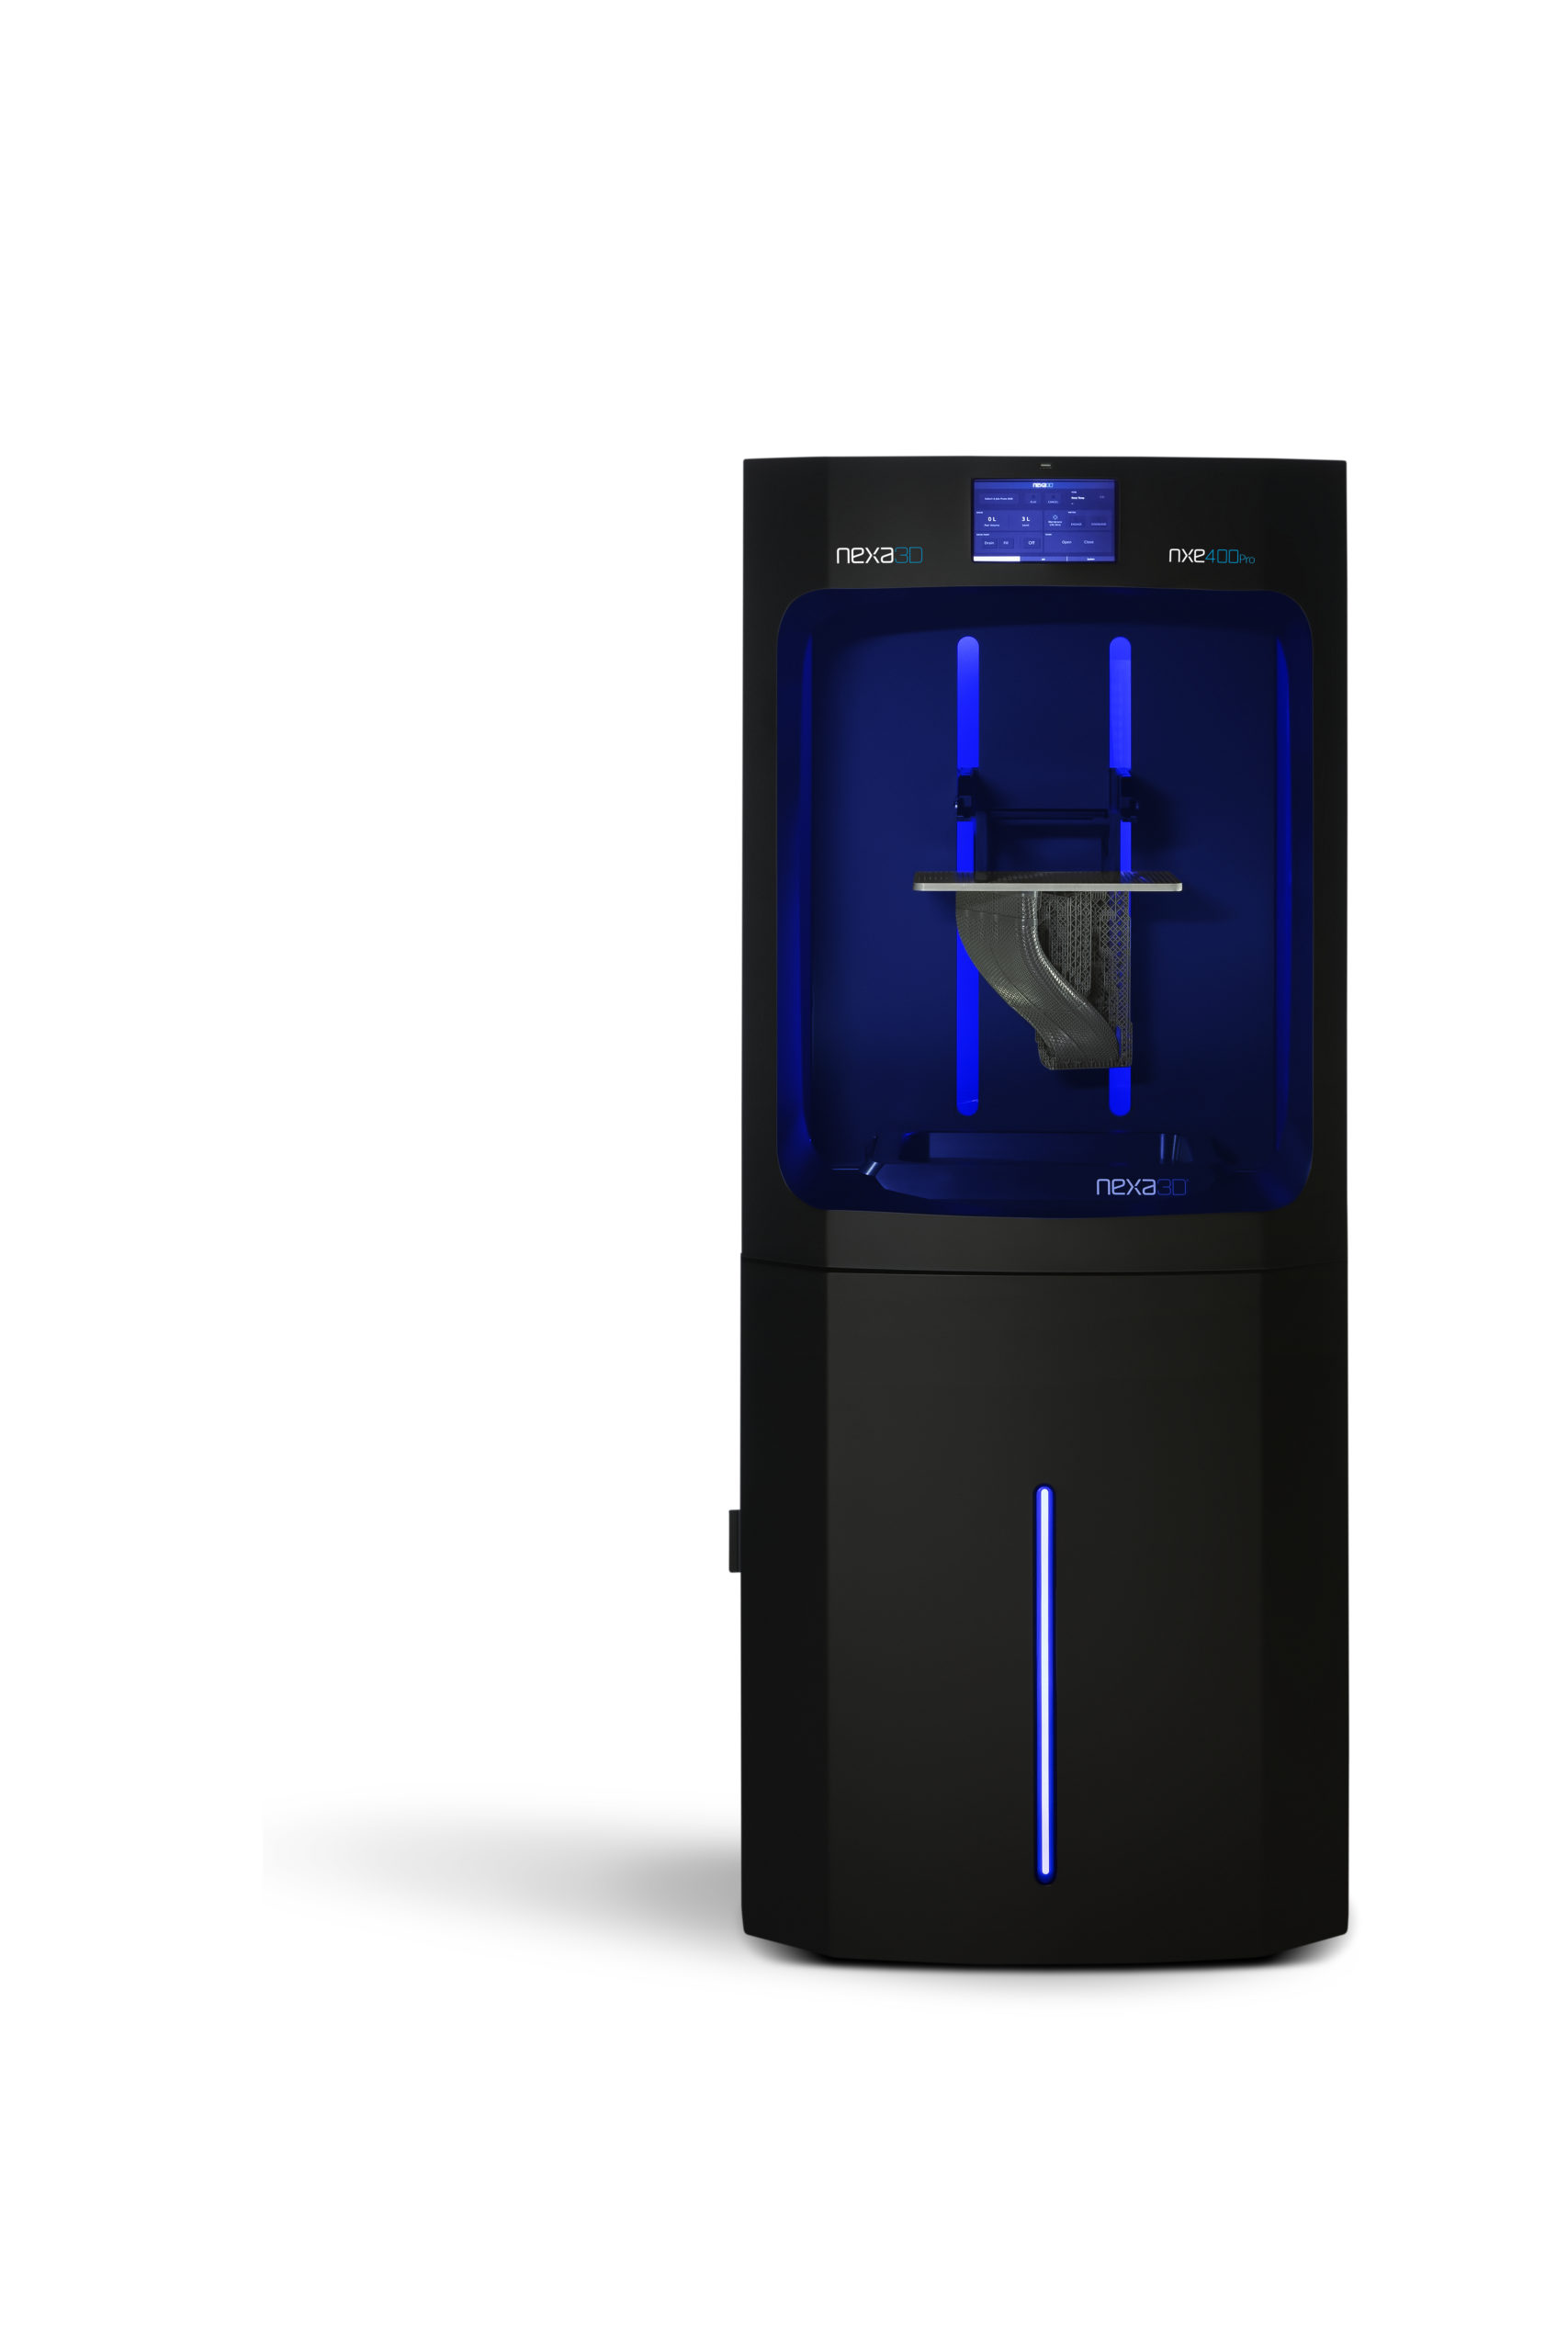 Nexa3D announced the immediate availability of its new Professional Series upgrade for its NXE series printers with higher productivity and part accuracy